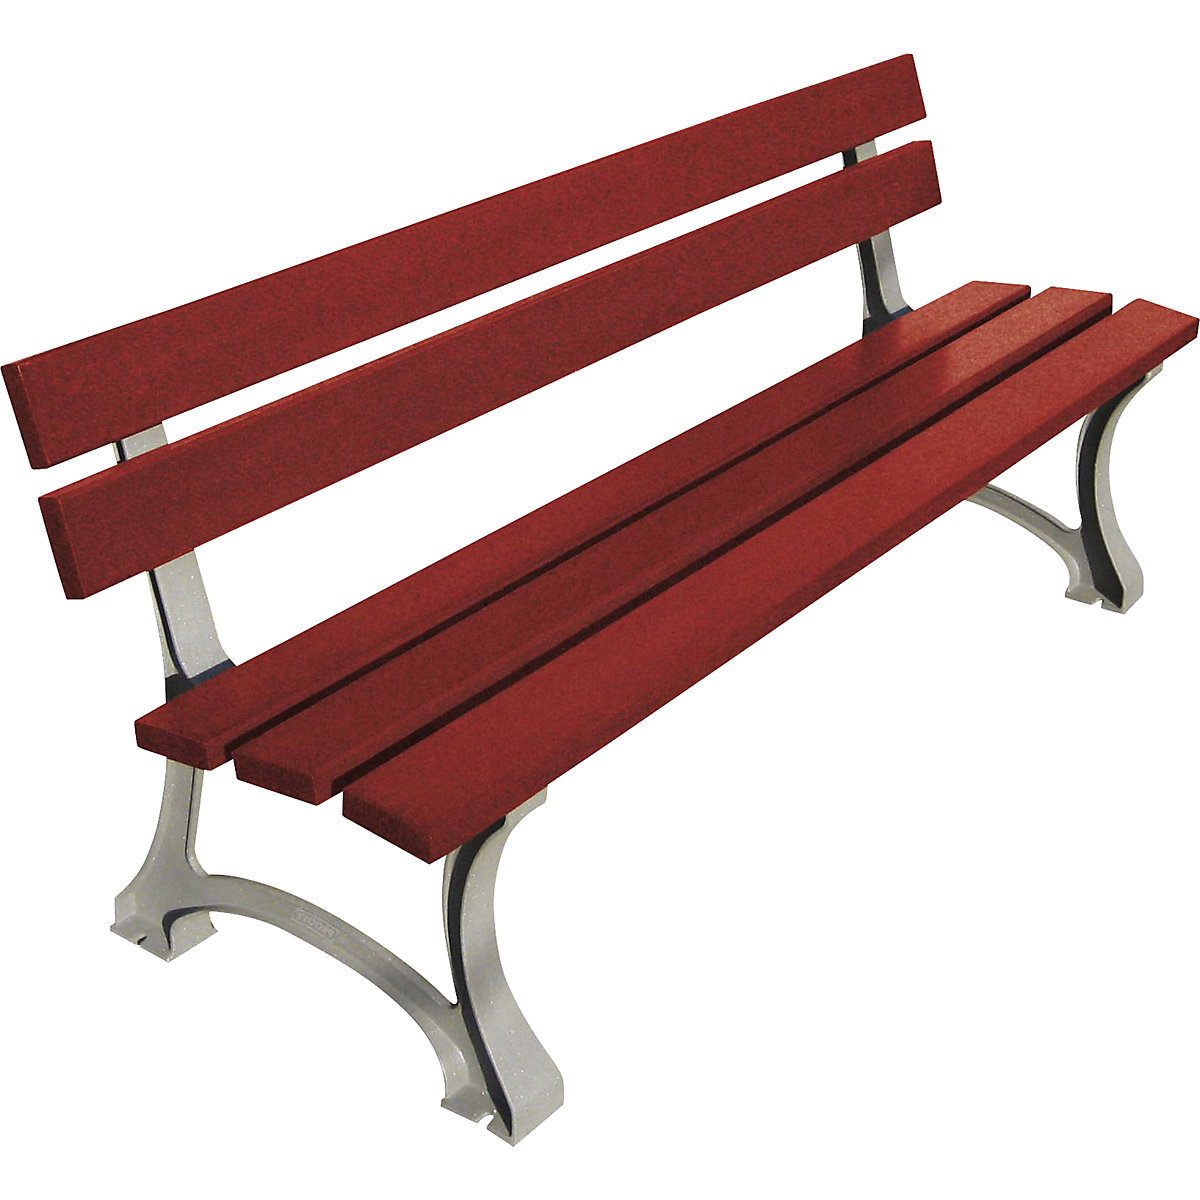 MORA park bench – PROCITY, overall height 746 mm, length 1800 mm, tropical wood, mahogany-2